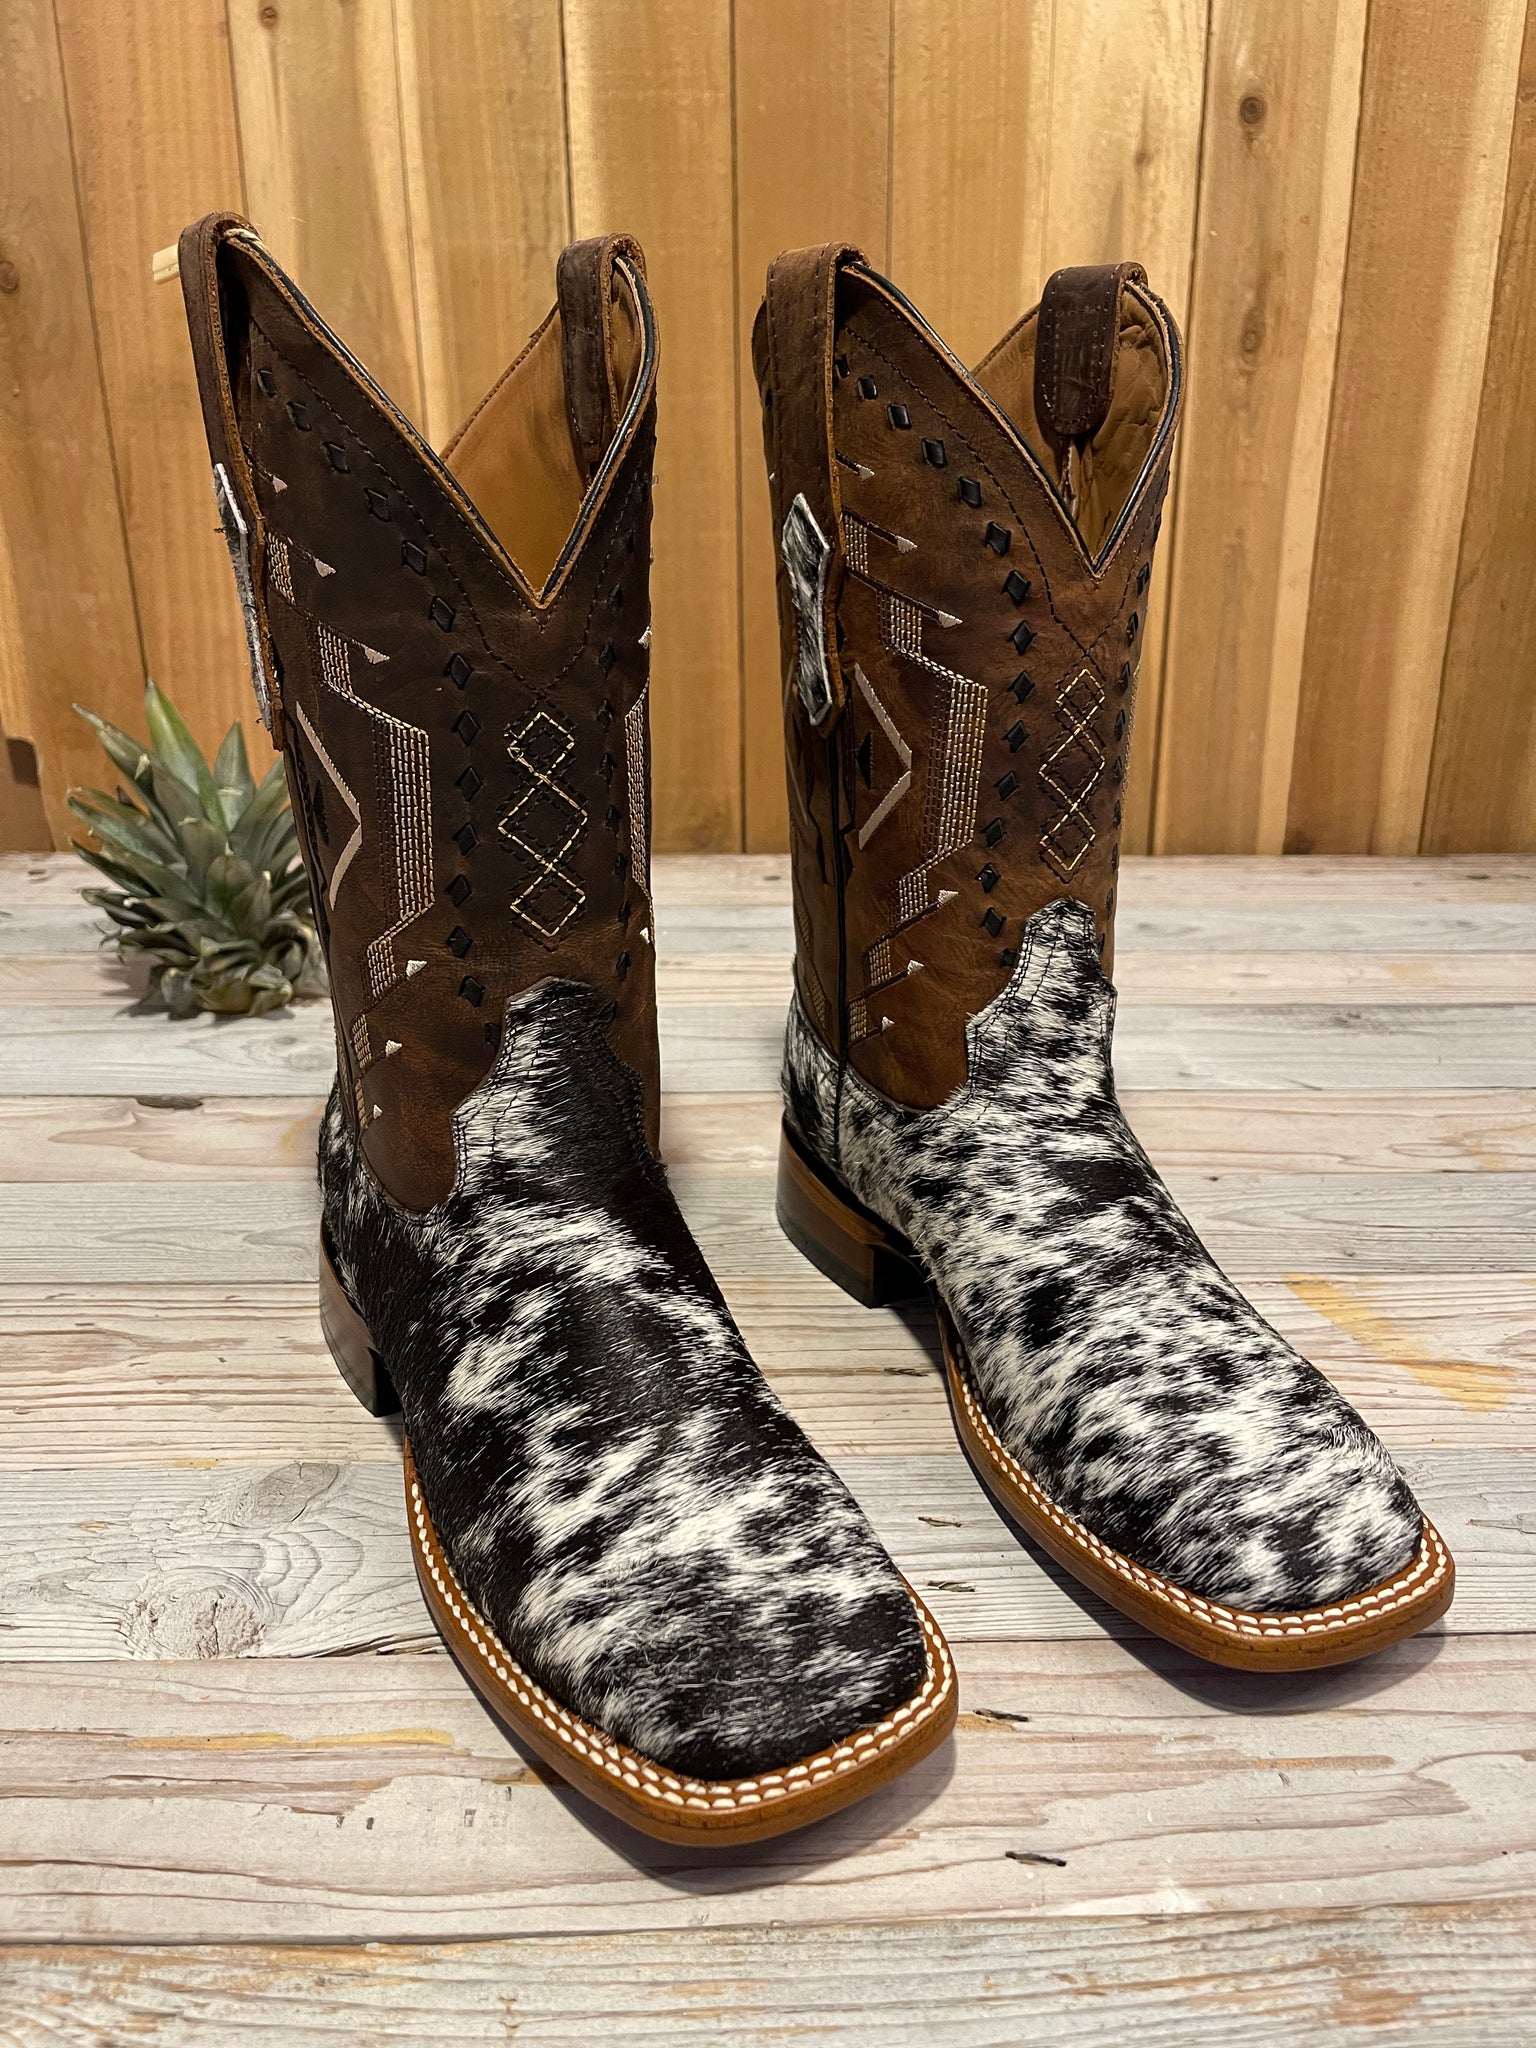 Exotic Leather Boot “Paisley” Cowhide Size 6